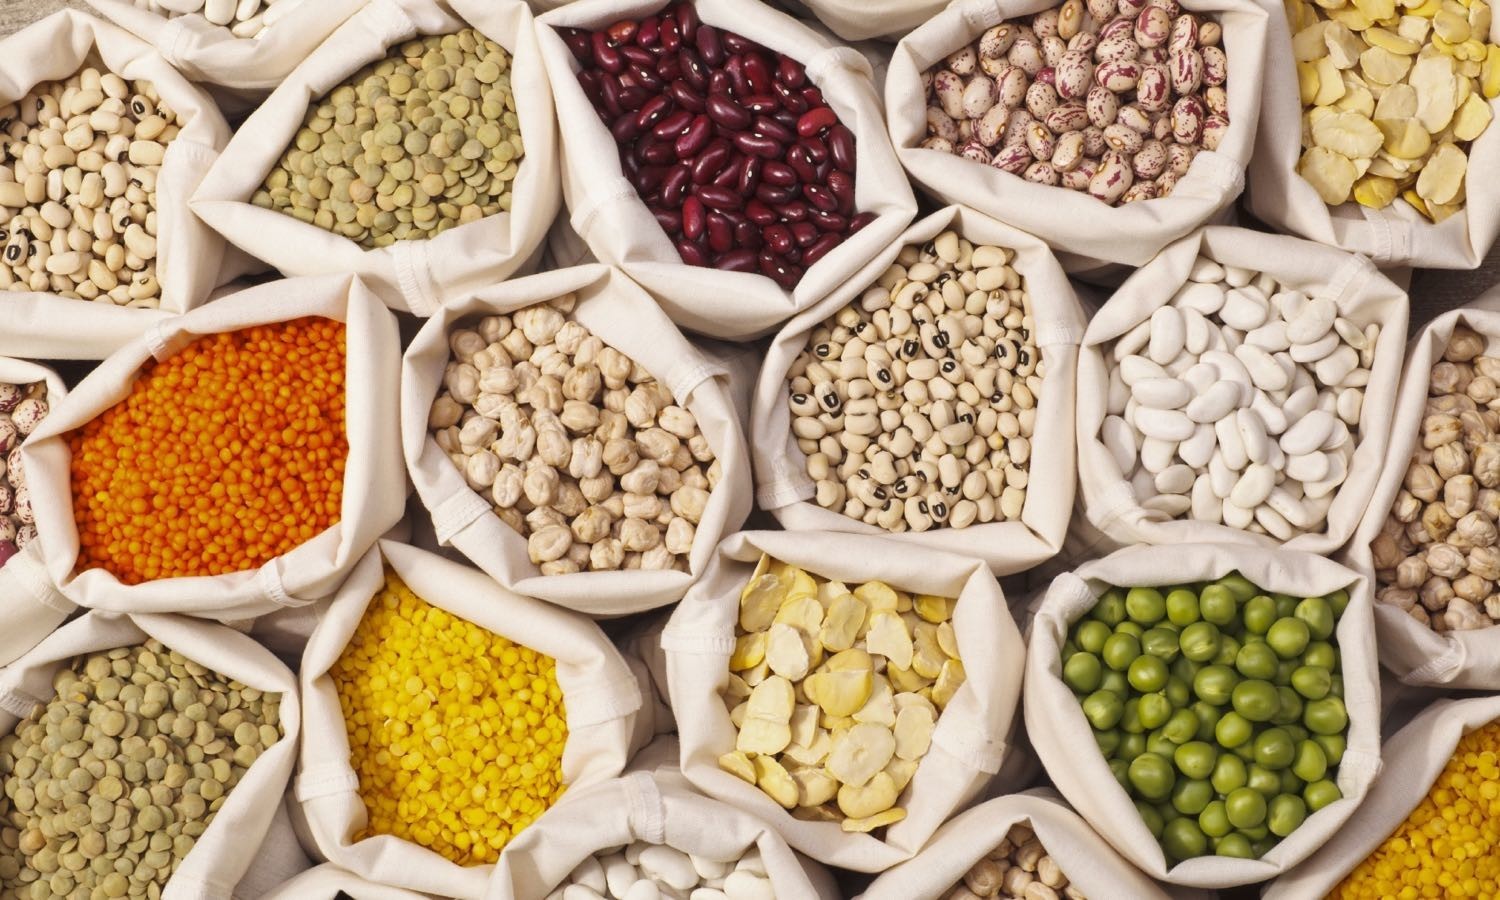 The United Nations General Assembly declared 2016 the International Year of Pulses